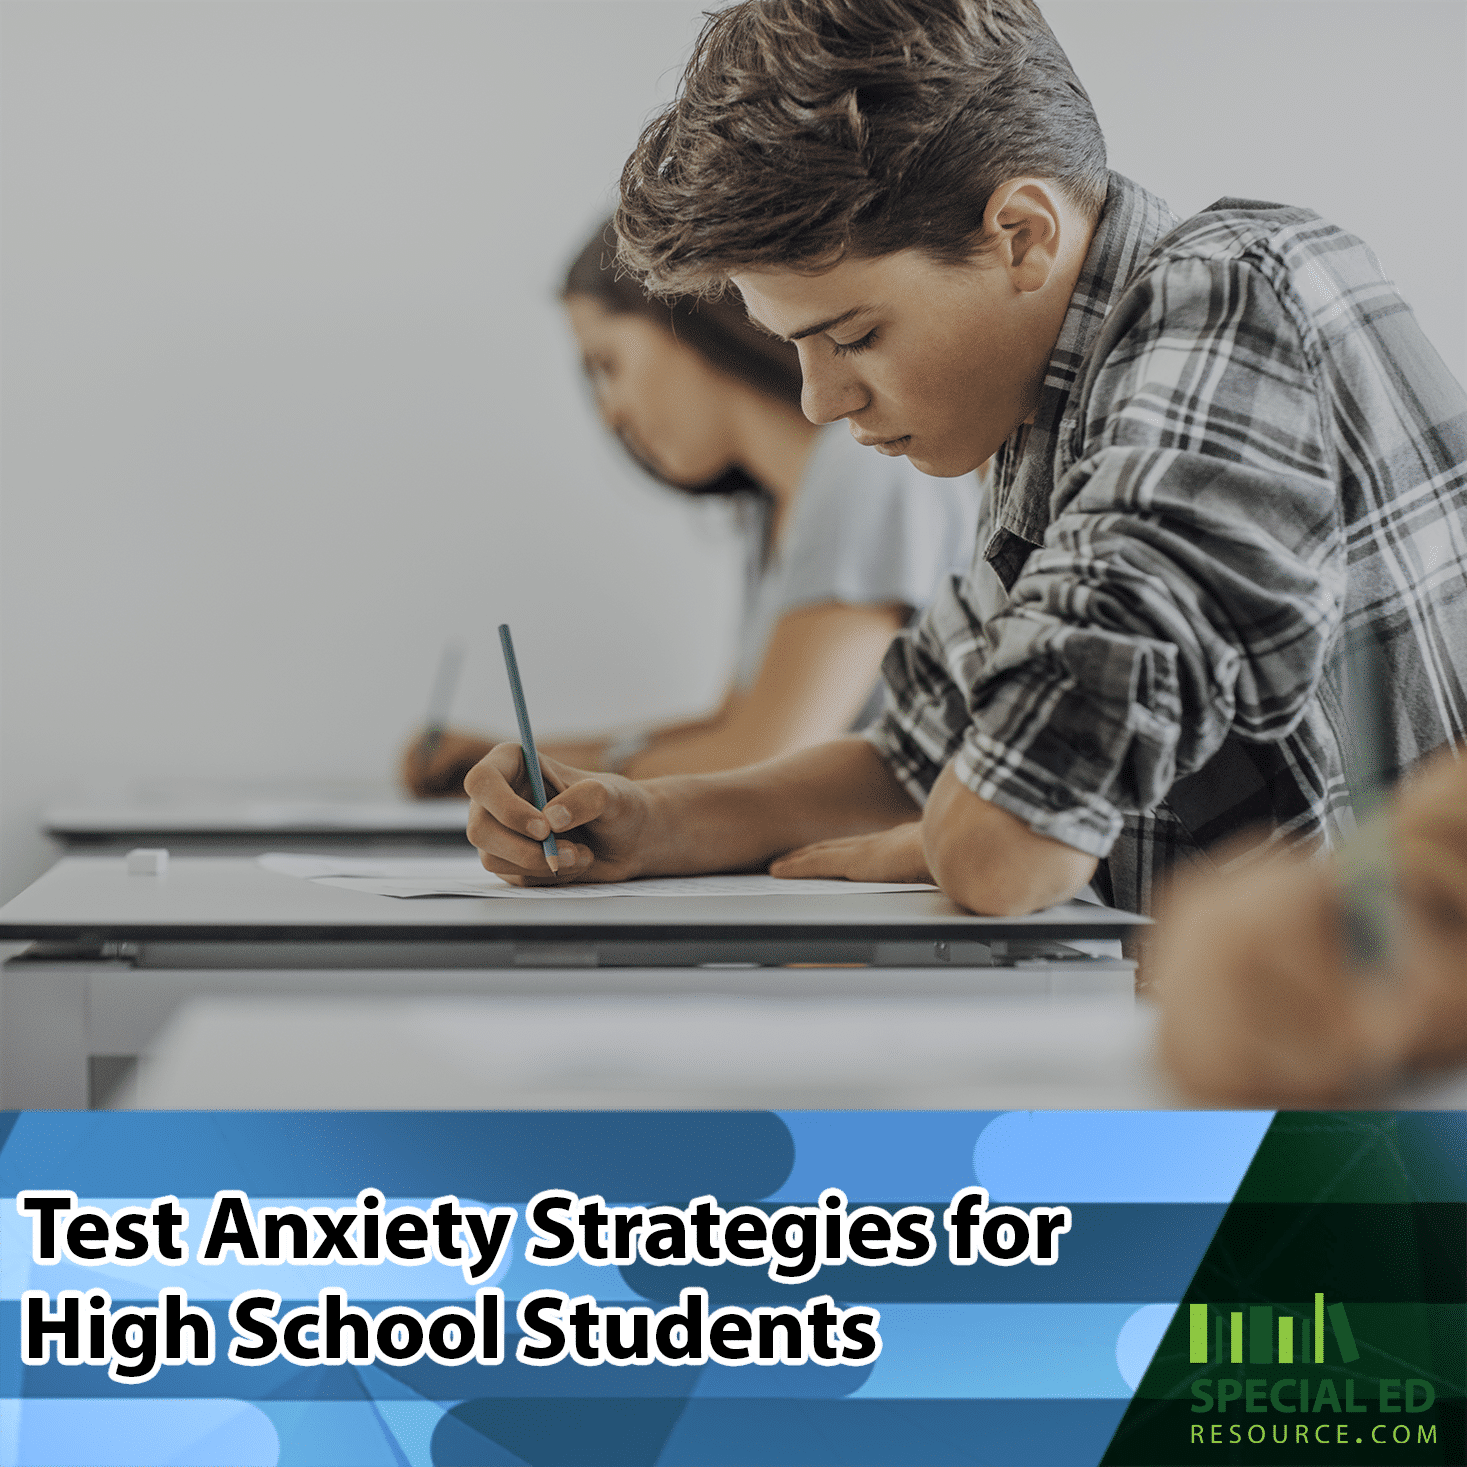 A male and female teen in a classroom confidently taking a test because they applied these proven test anxiety strategies for high school students.